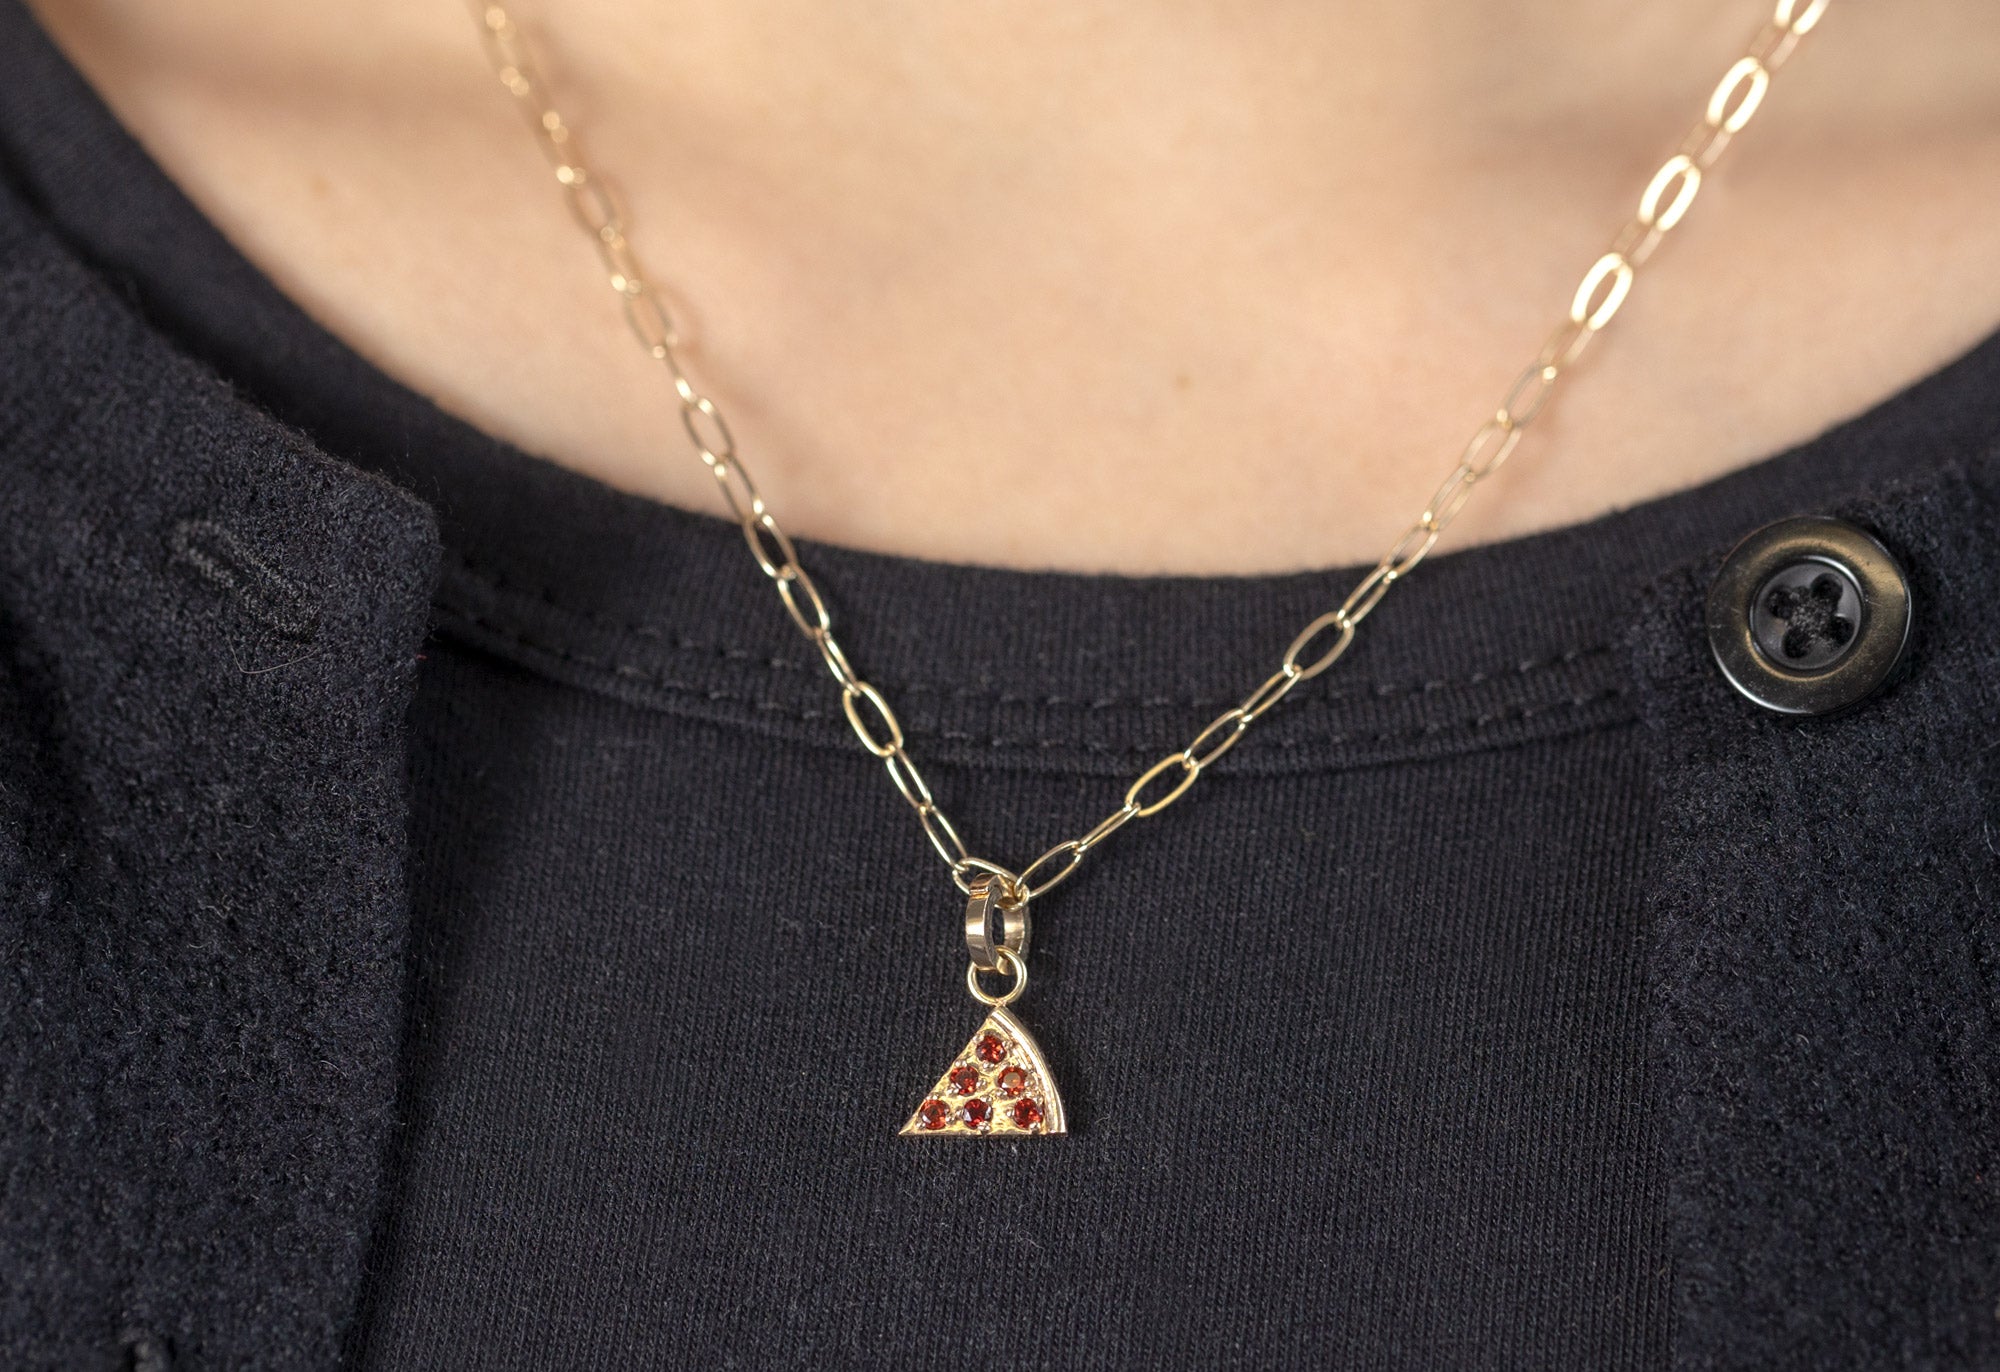 10k Yellow Gold Pizza Slice Charm on Necklace on Model